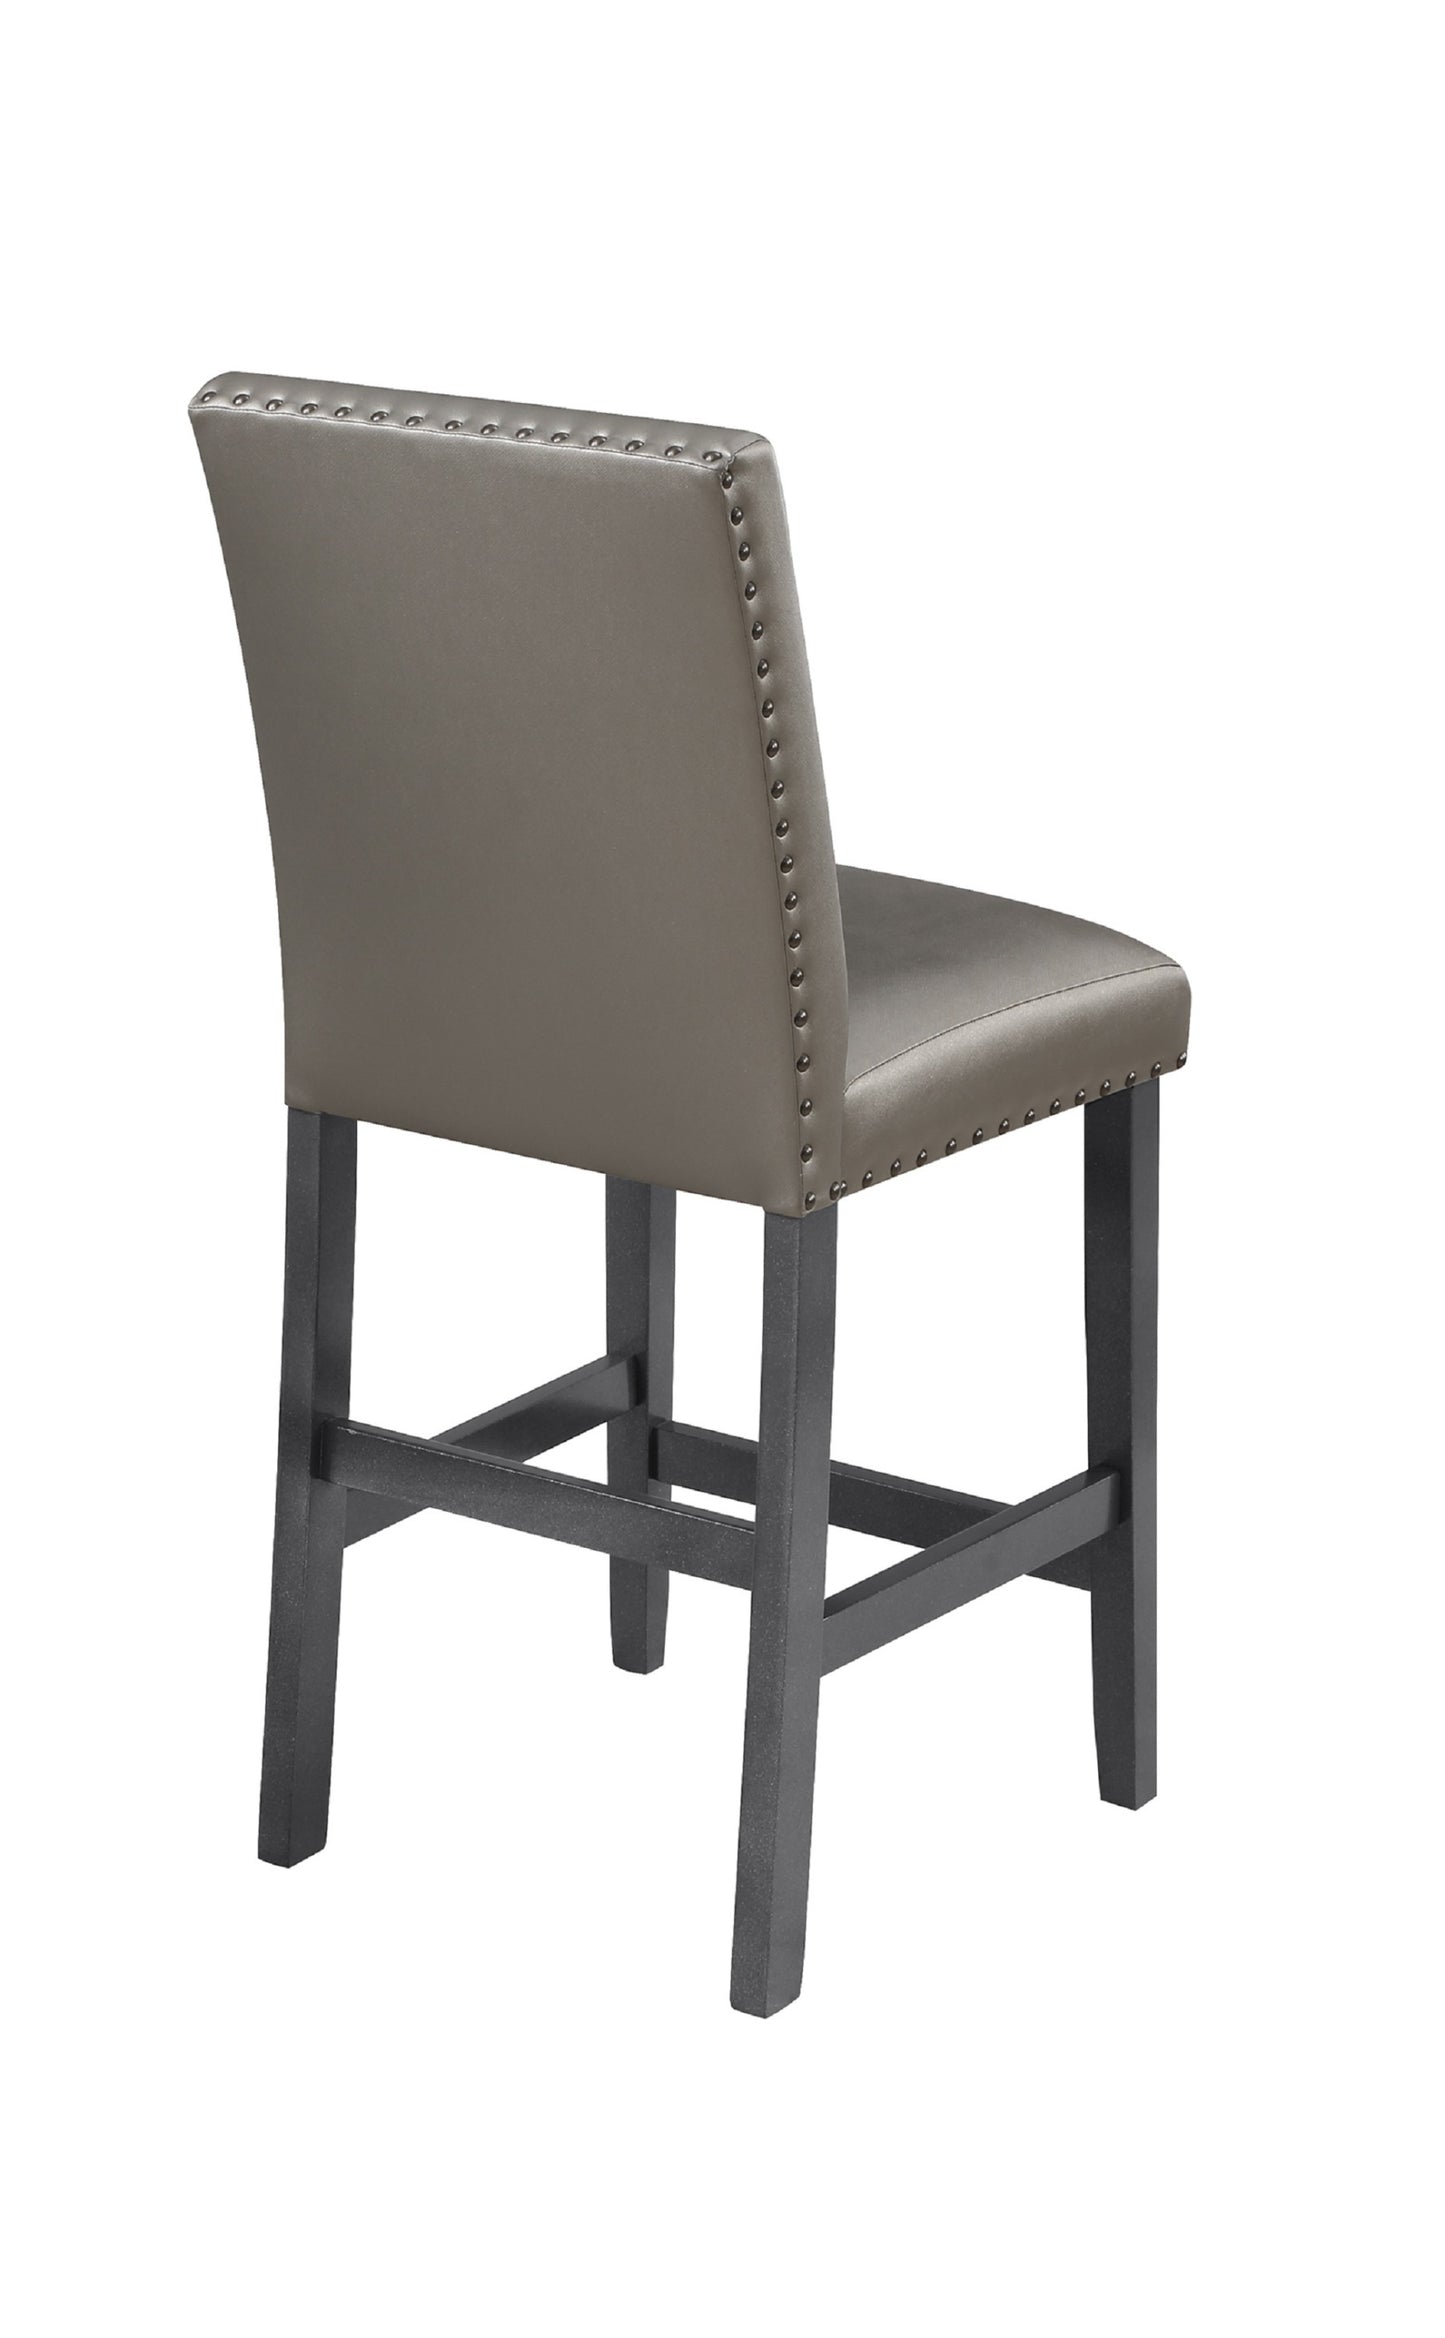 Traditional Modern 2pc Set Counter Height Dining Side Chairs Upholstered PU Fabric Zinc Gunmetal Brown Two-Tone Finish Nailhead Trim Dining Room Furniture